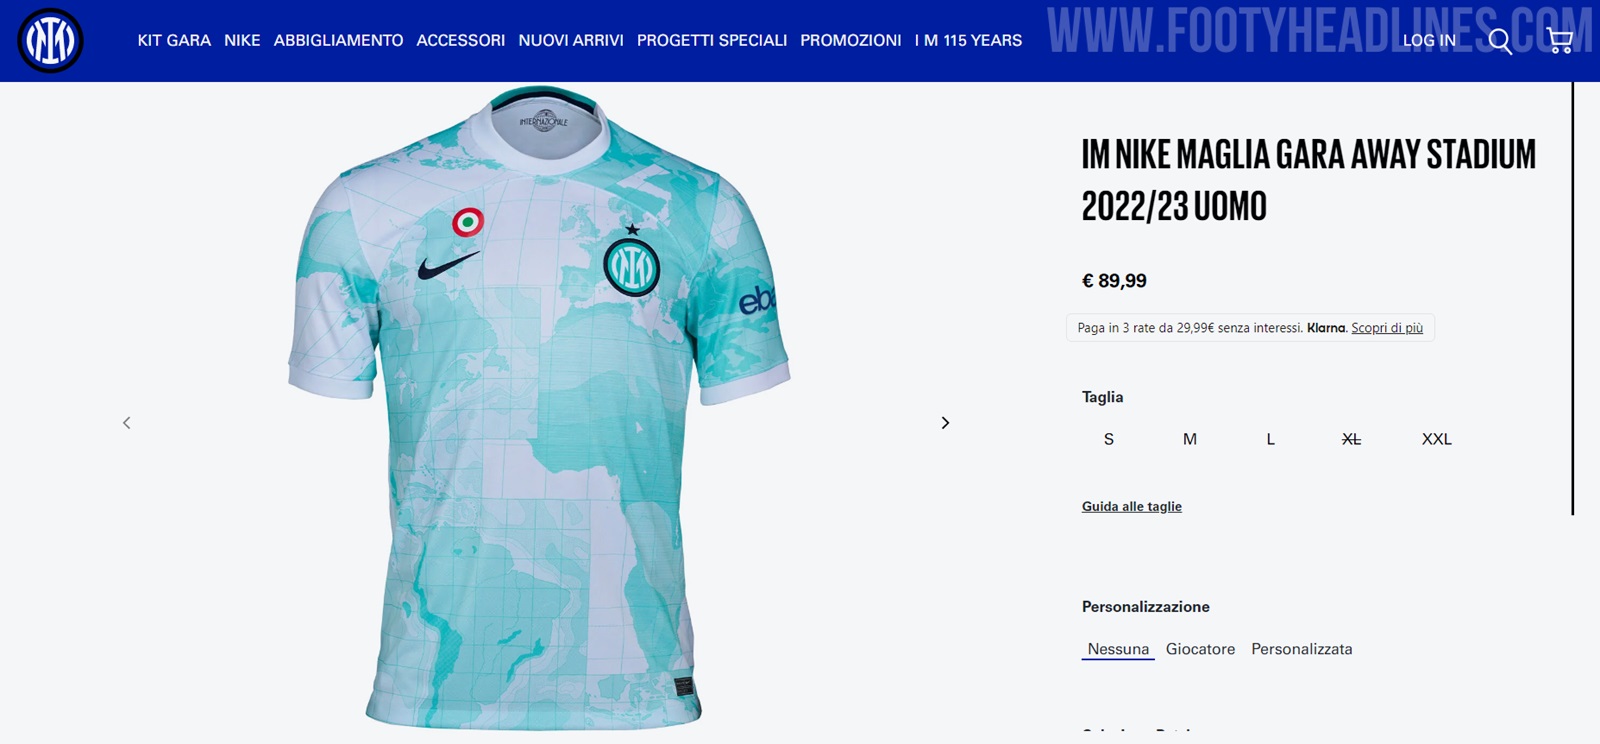 Sponsorless Inter Home and Away Kits Now Available to Buy - Footy Headlines